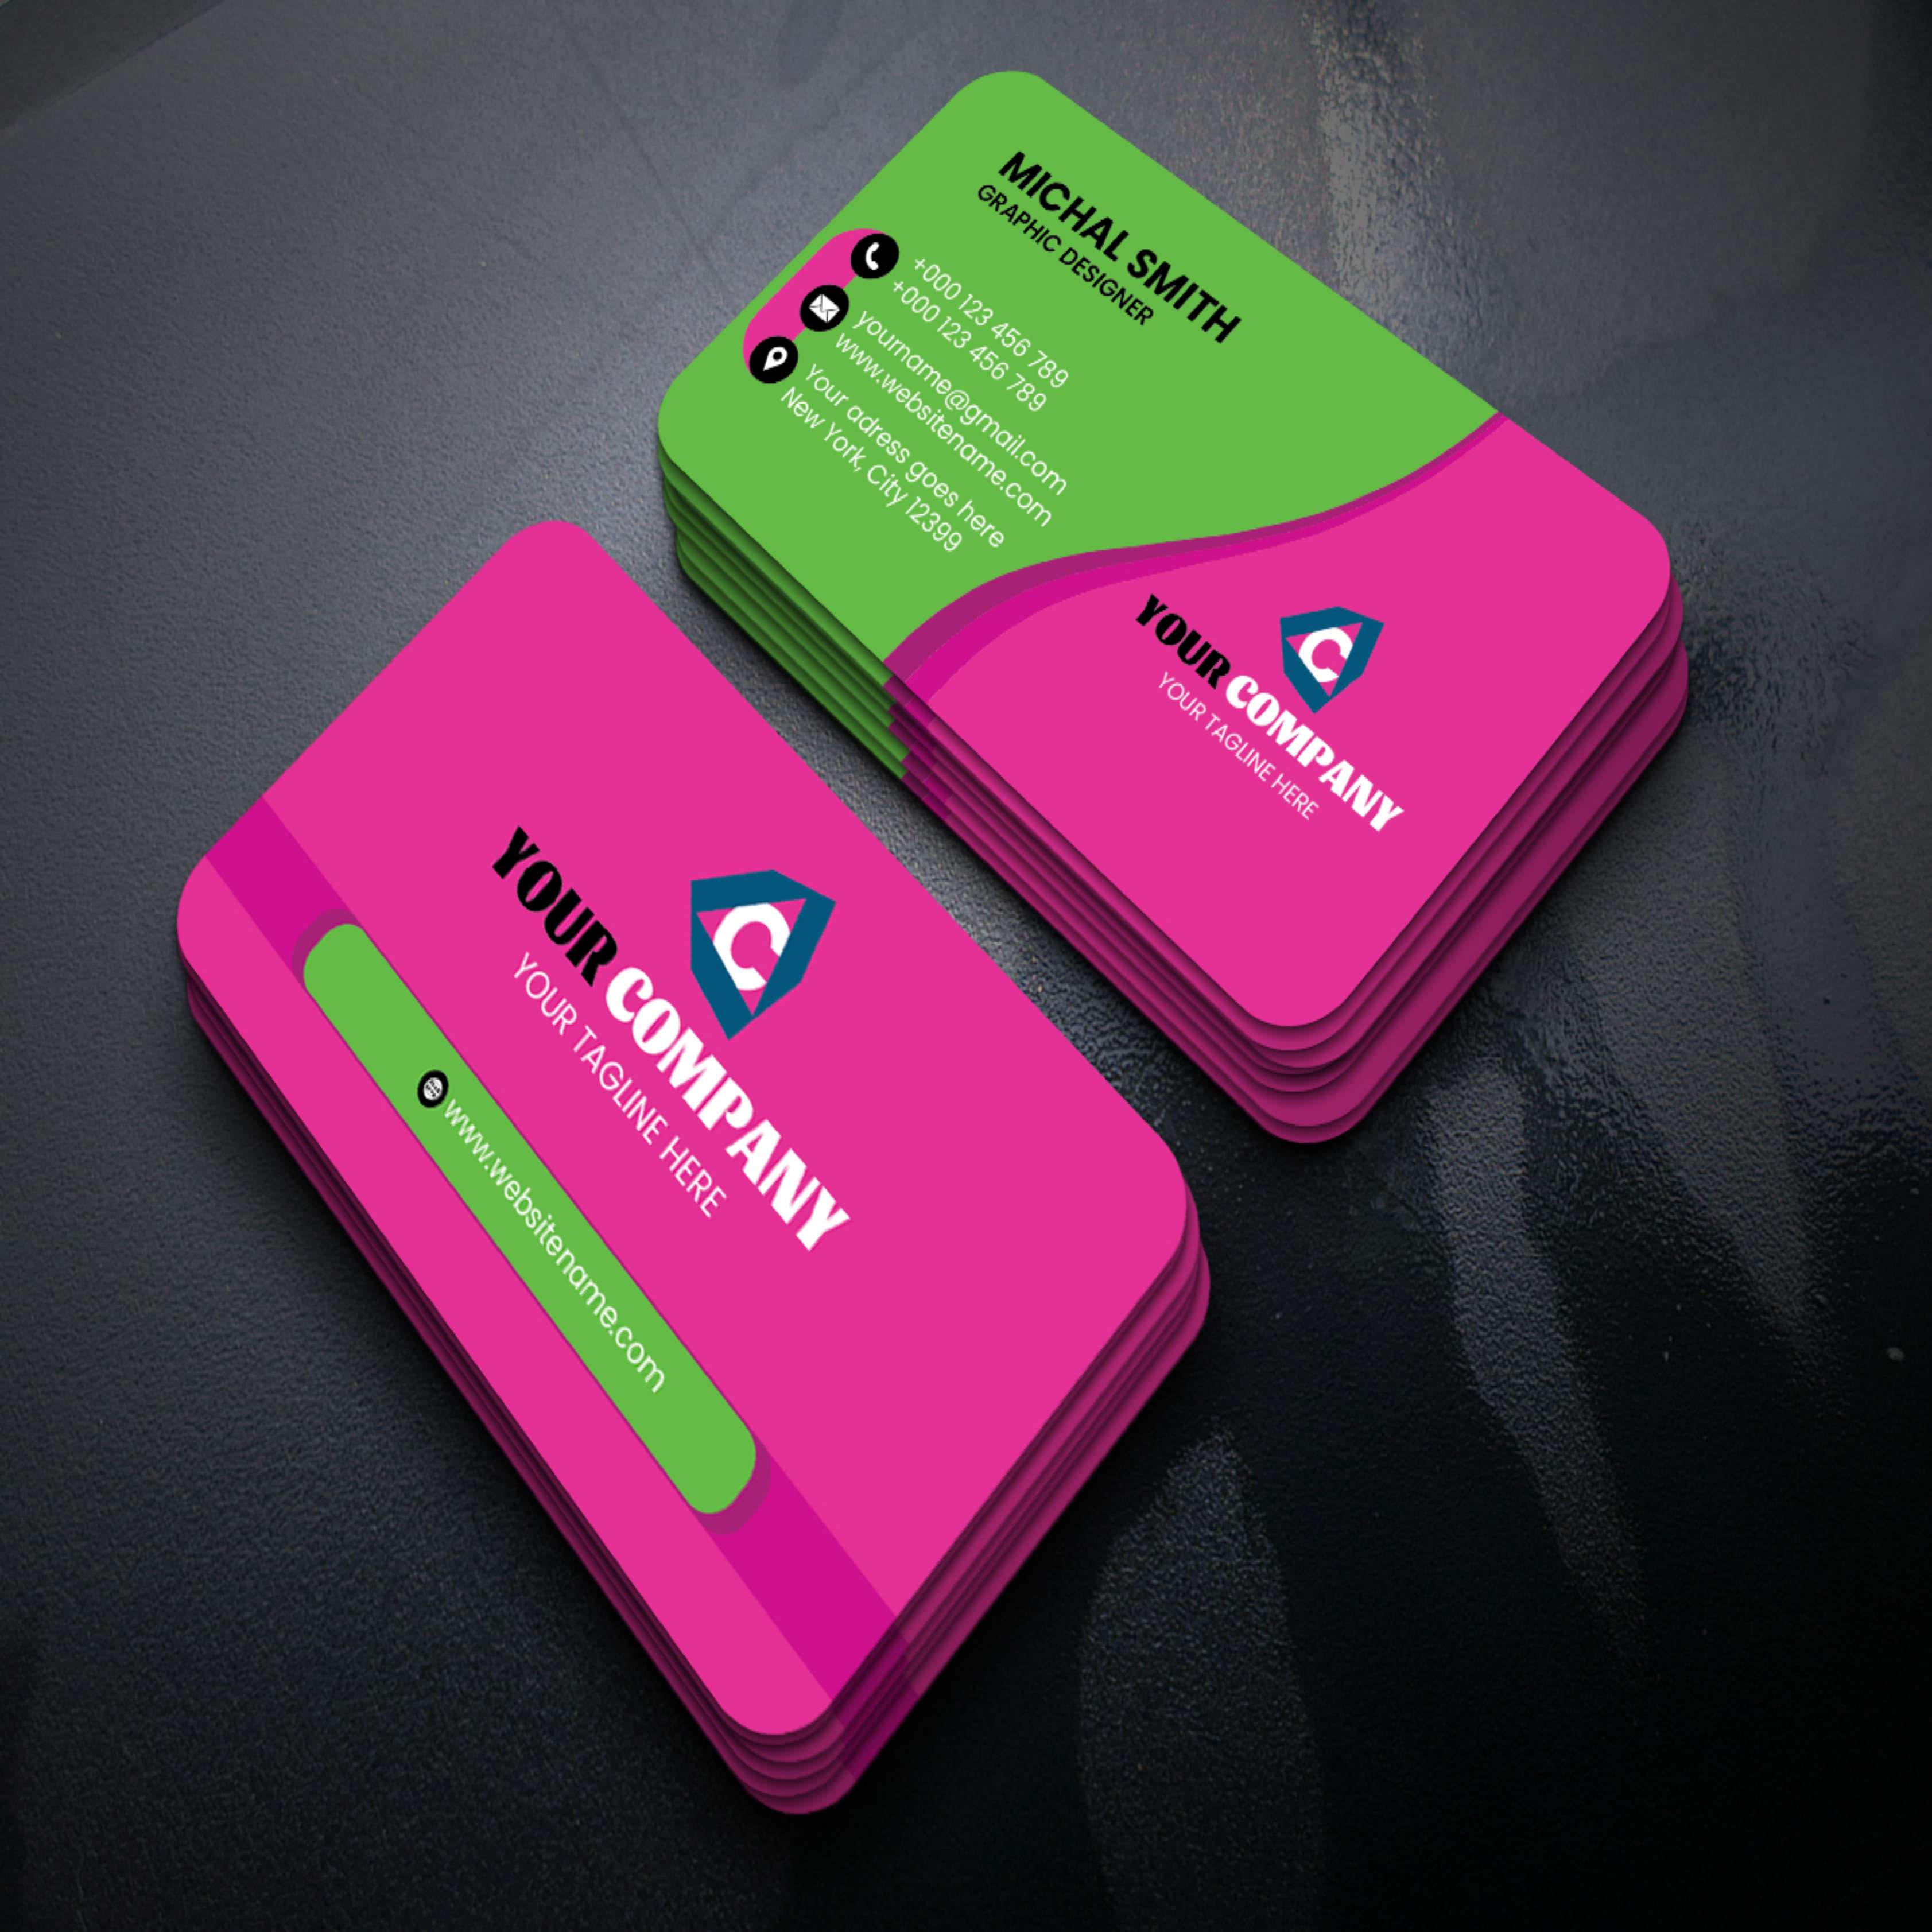 Business Card Design 4 Color variant included preview image.